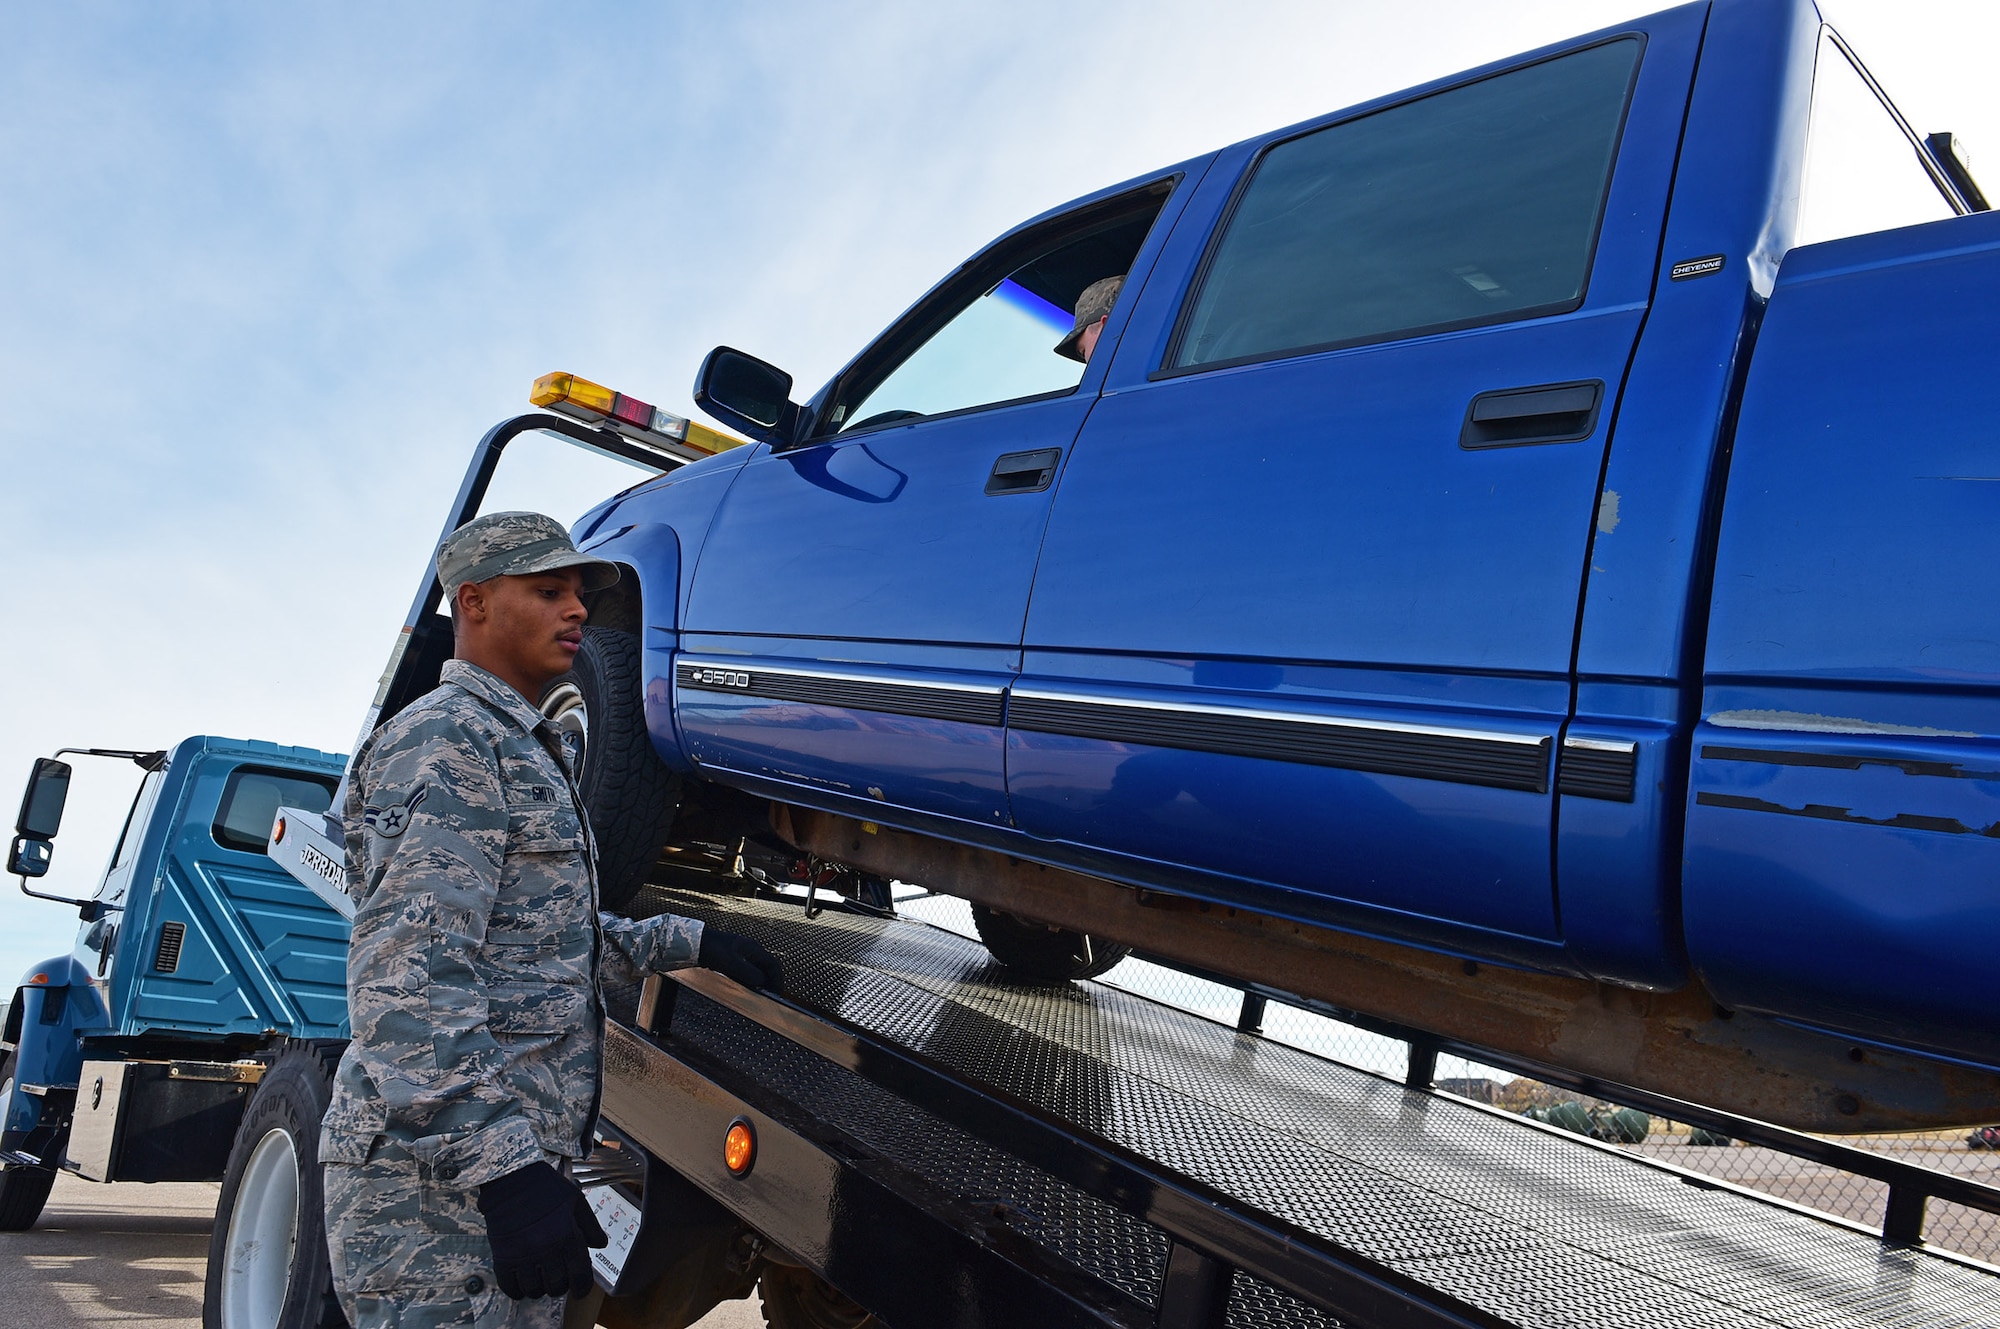 Airman 1st Class Jordan Smith, a vehicle operations apprentice assigned to the 28th Logistics Readiness Squadron, uses a winch to prepare a truck to be towed for repairs at Ellsworth Air Force Base, S.D., Nov. 8, 2016. Vehicle operators are responsible for ensuring the readiness of government vehicles on Ellsworth. (U.S. Air Force photo by Airman 1st Class James L. Miller)